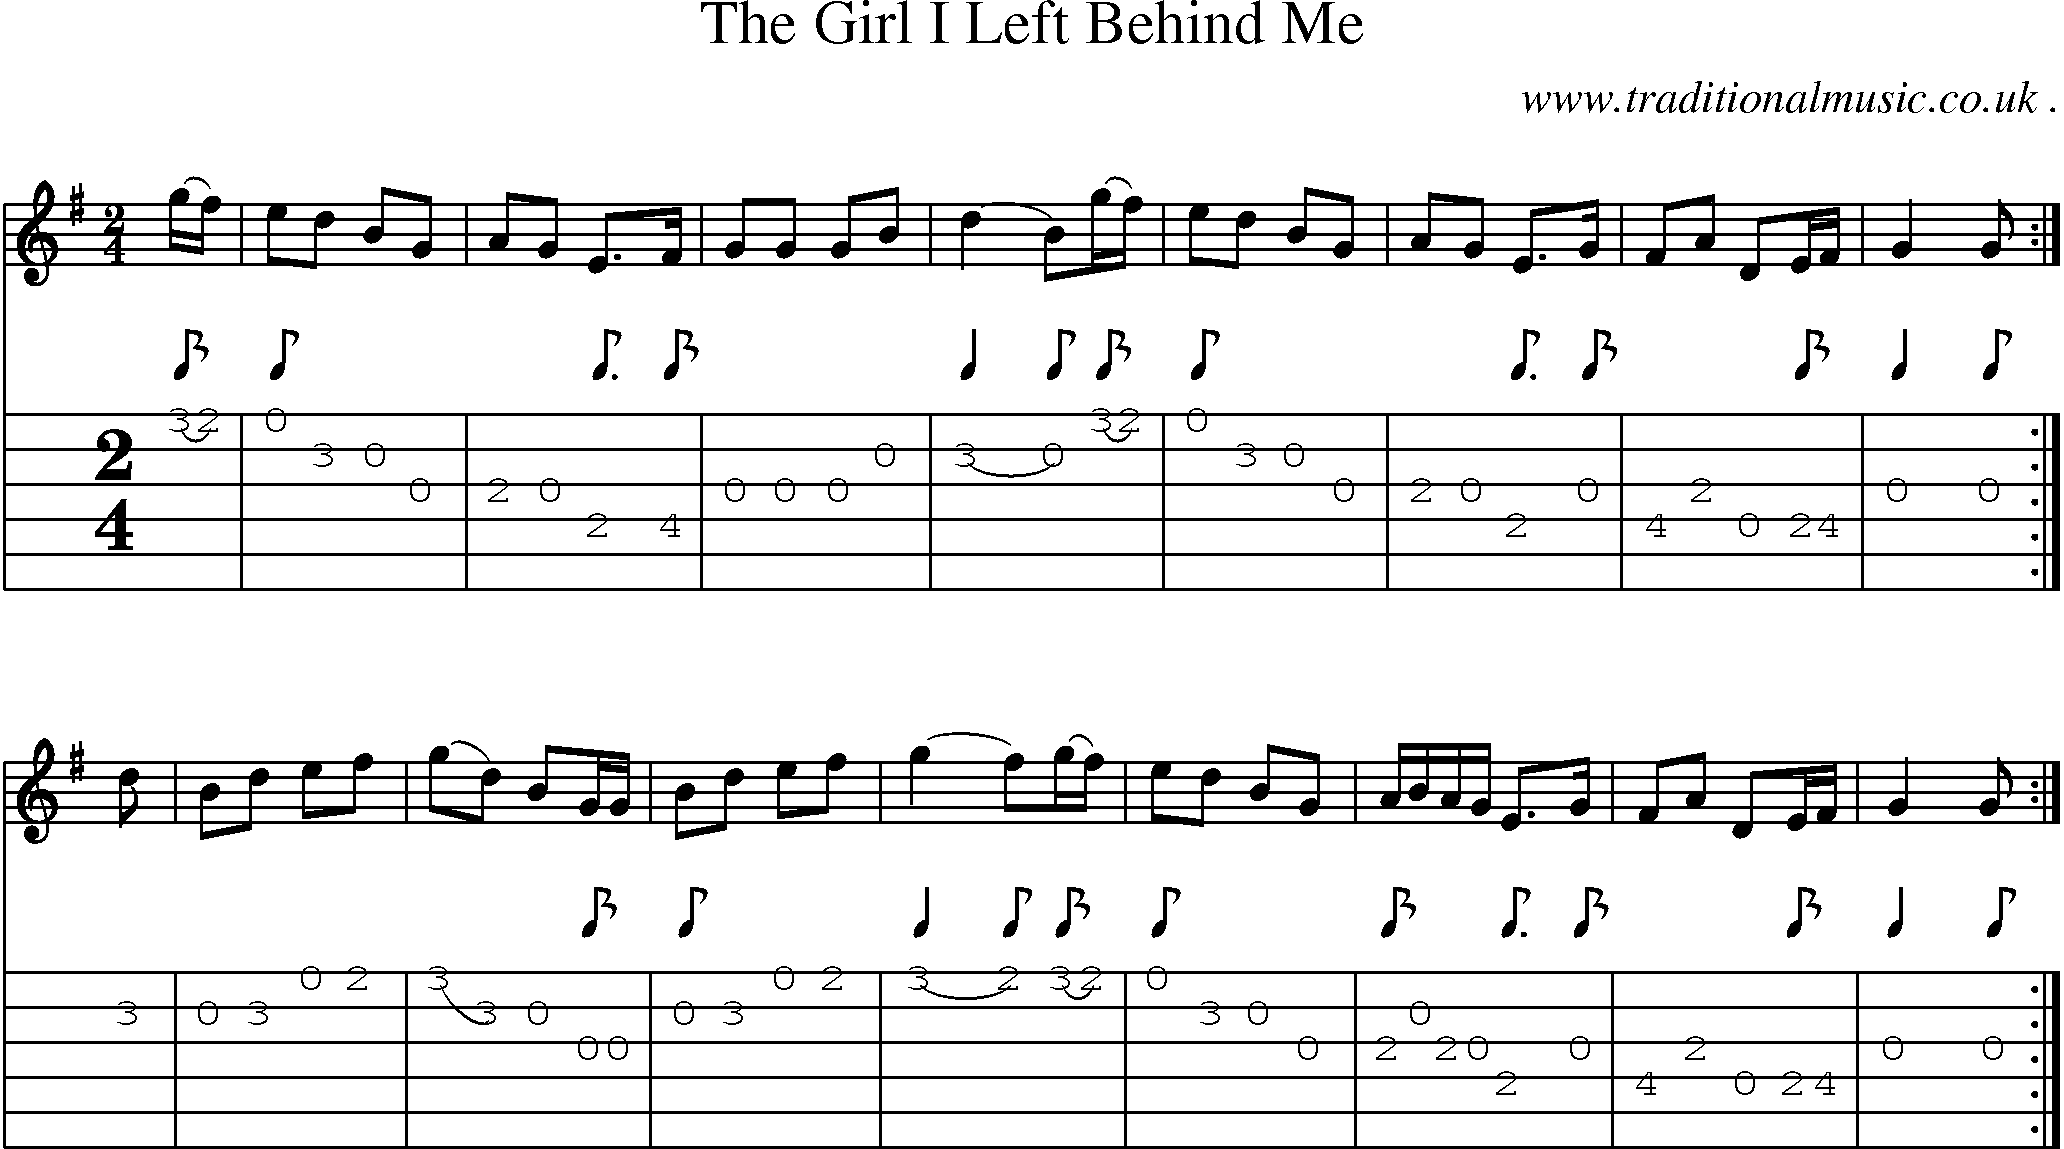 Music Score and Guitar Tabs for The Girl I Left Behind Me